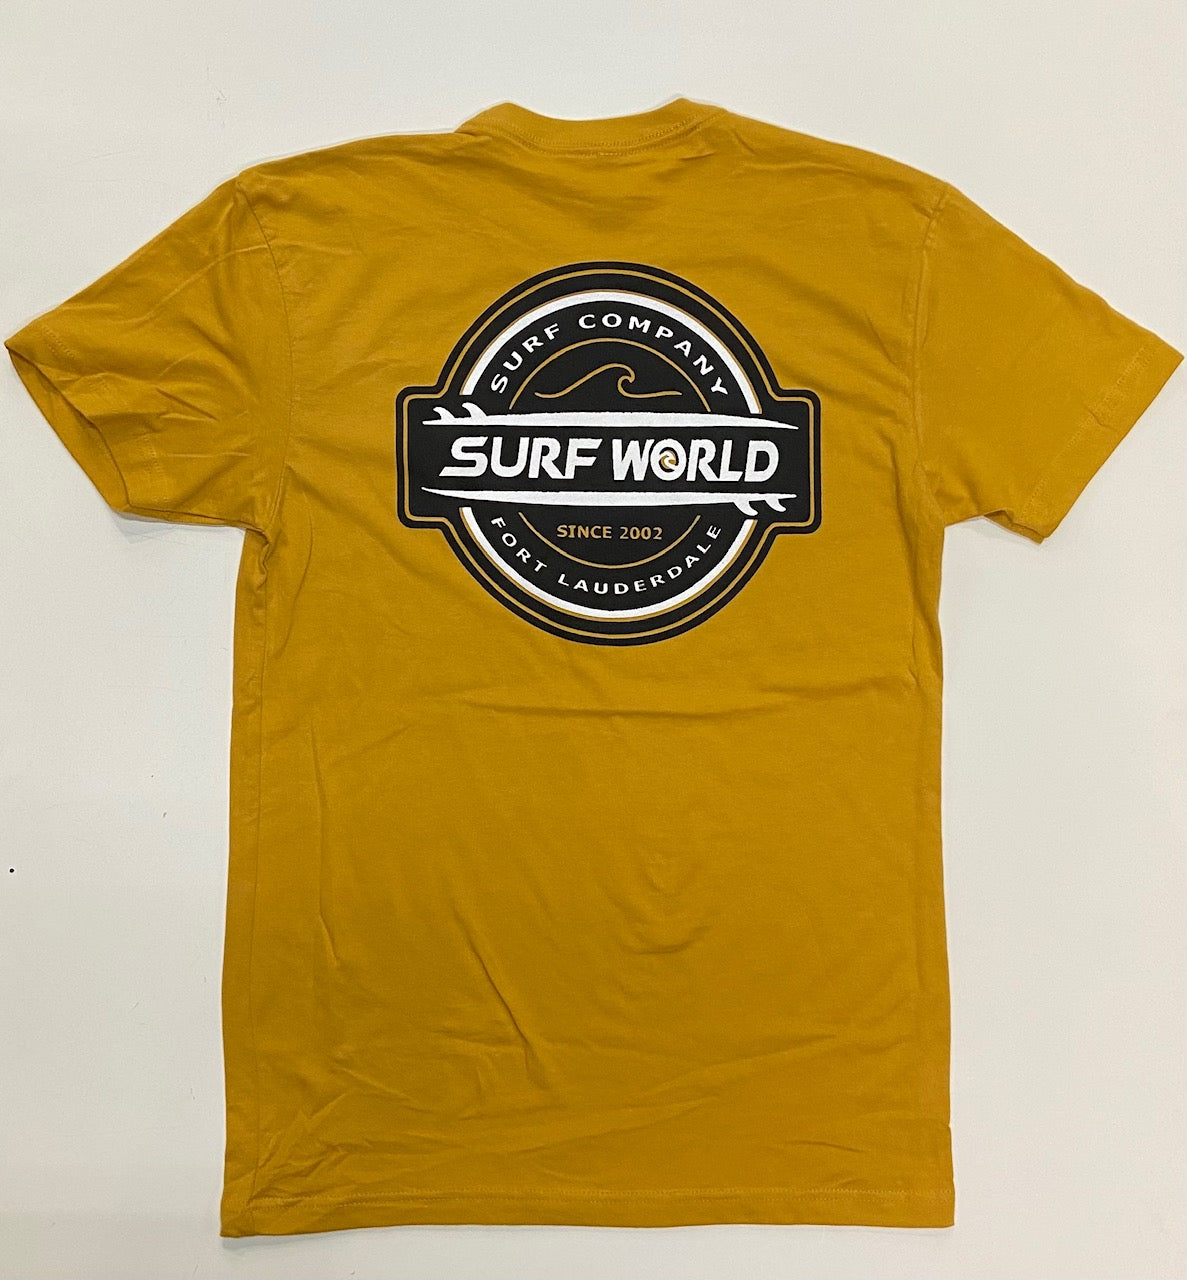 Surf World Fort Lauderdale Double Boards Tee Shirt Mens T Shirt